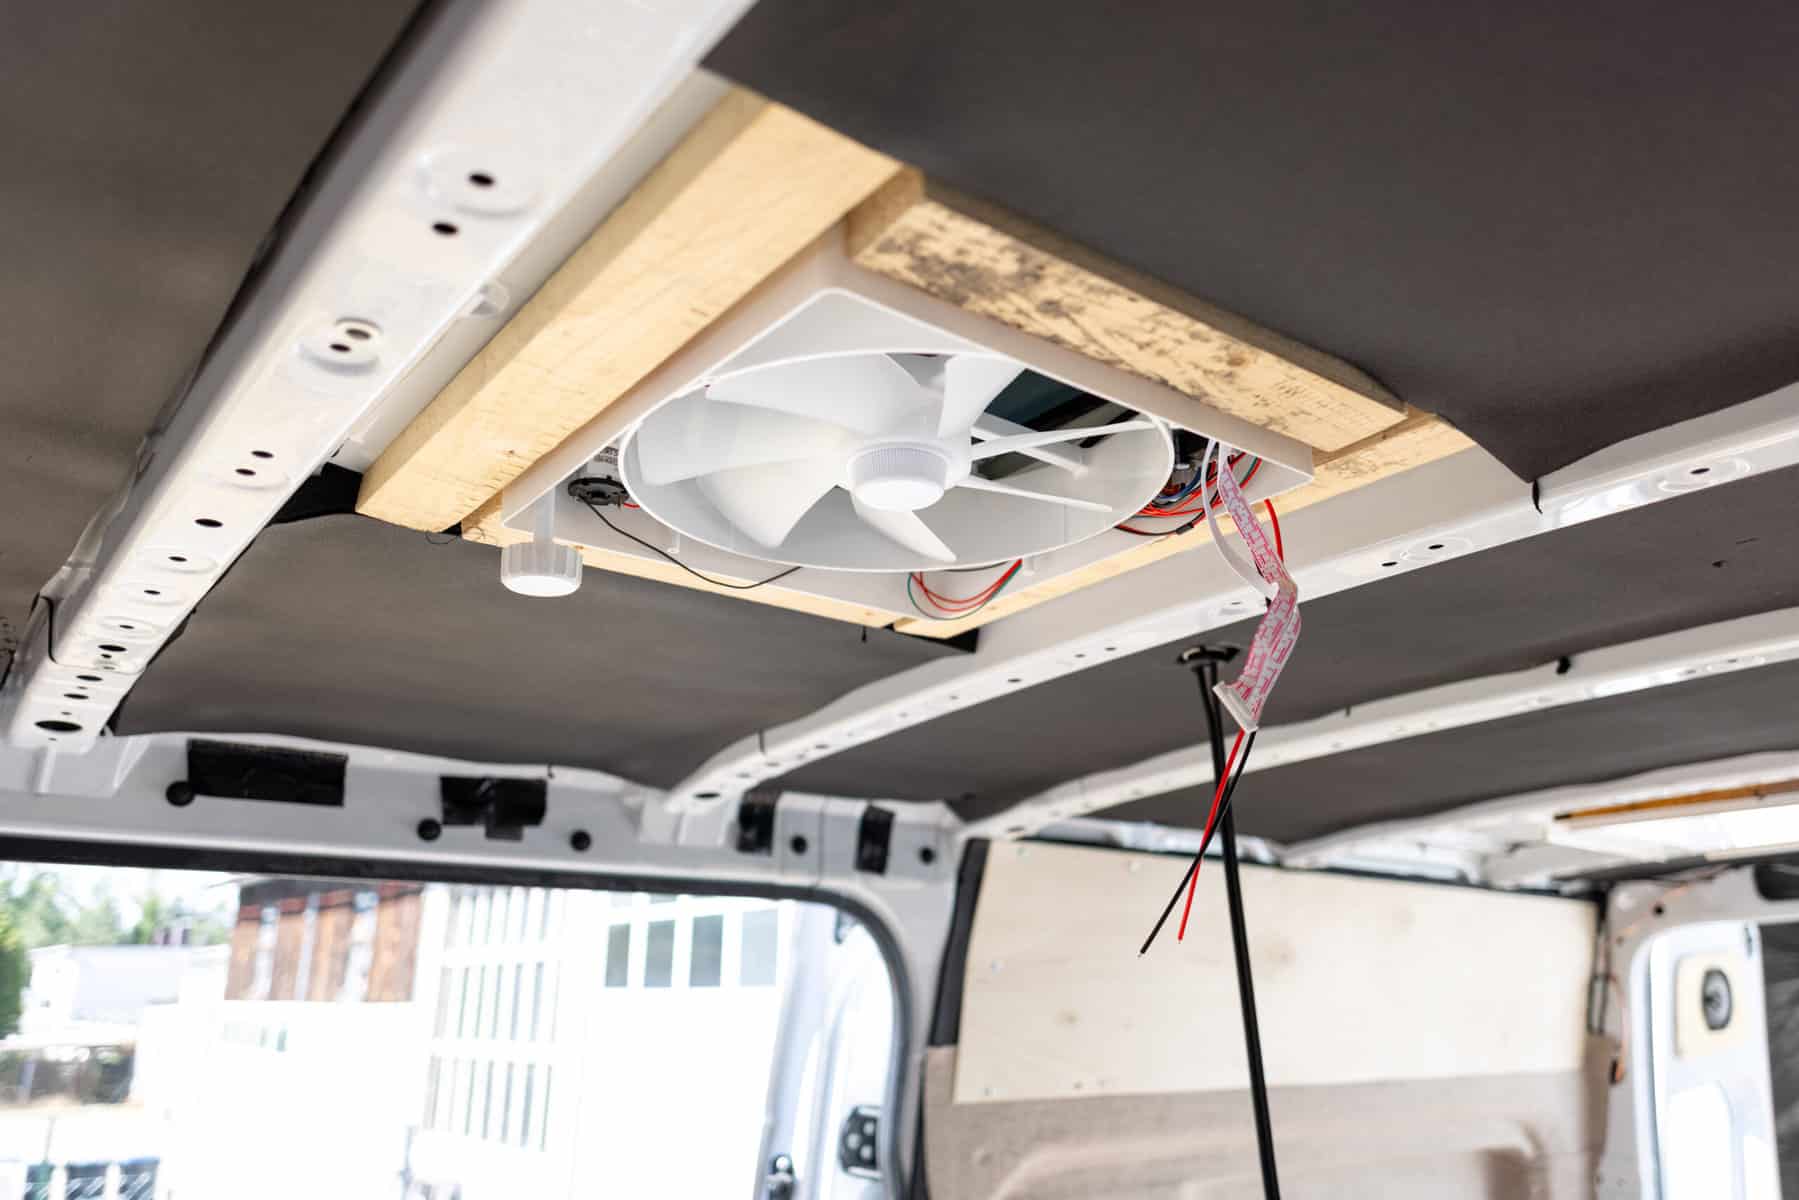 Roof fan with unattached wires installed in unfinished camper van